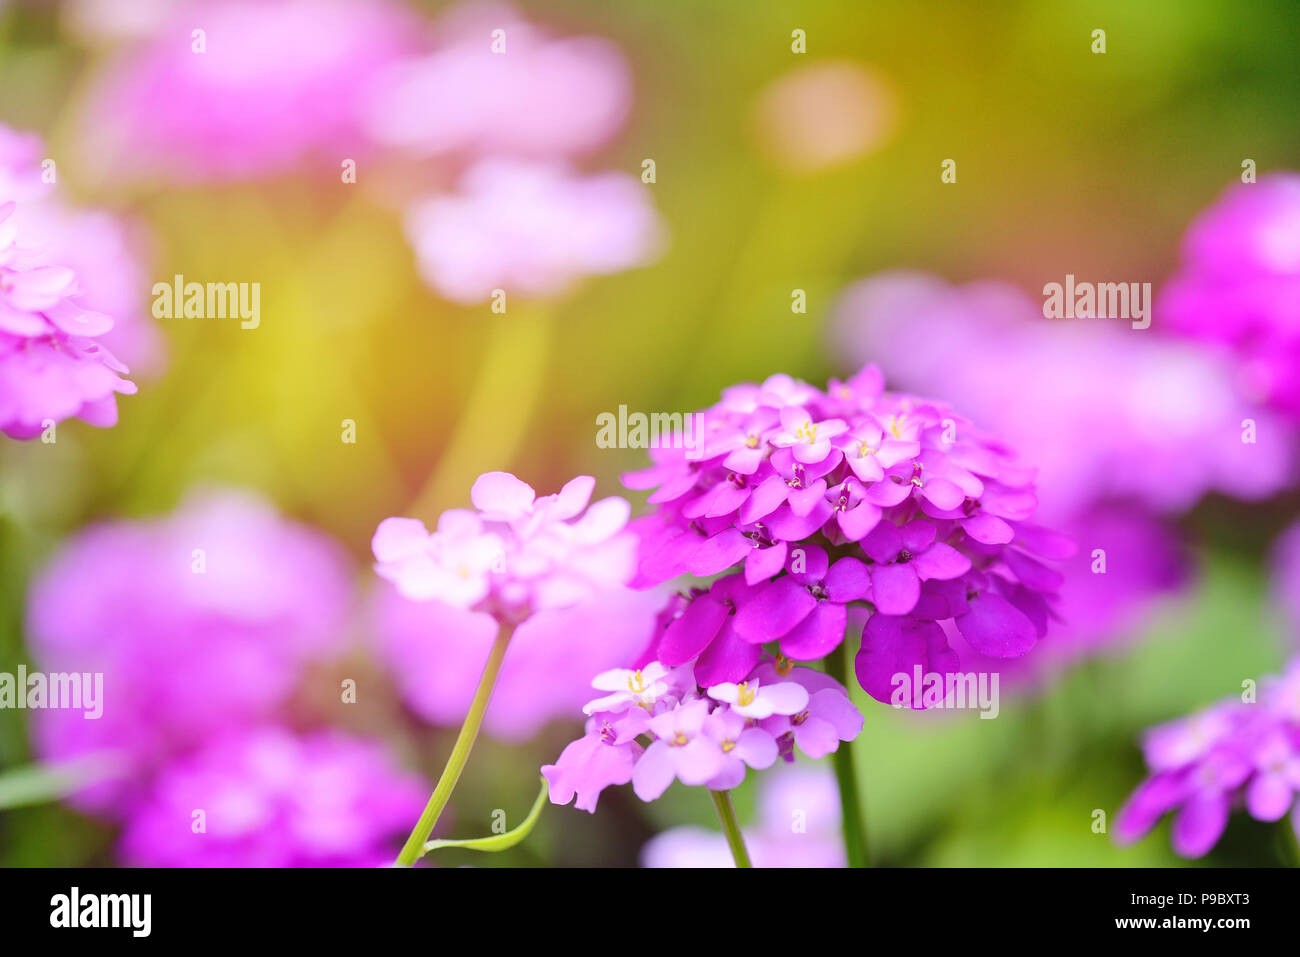 Small purple flowers Iberis umbellate in summer in a garden Stock Photo